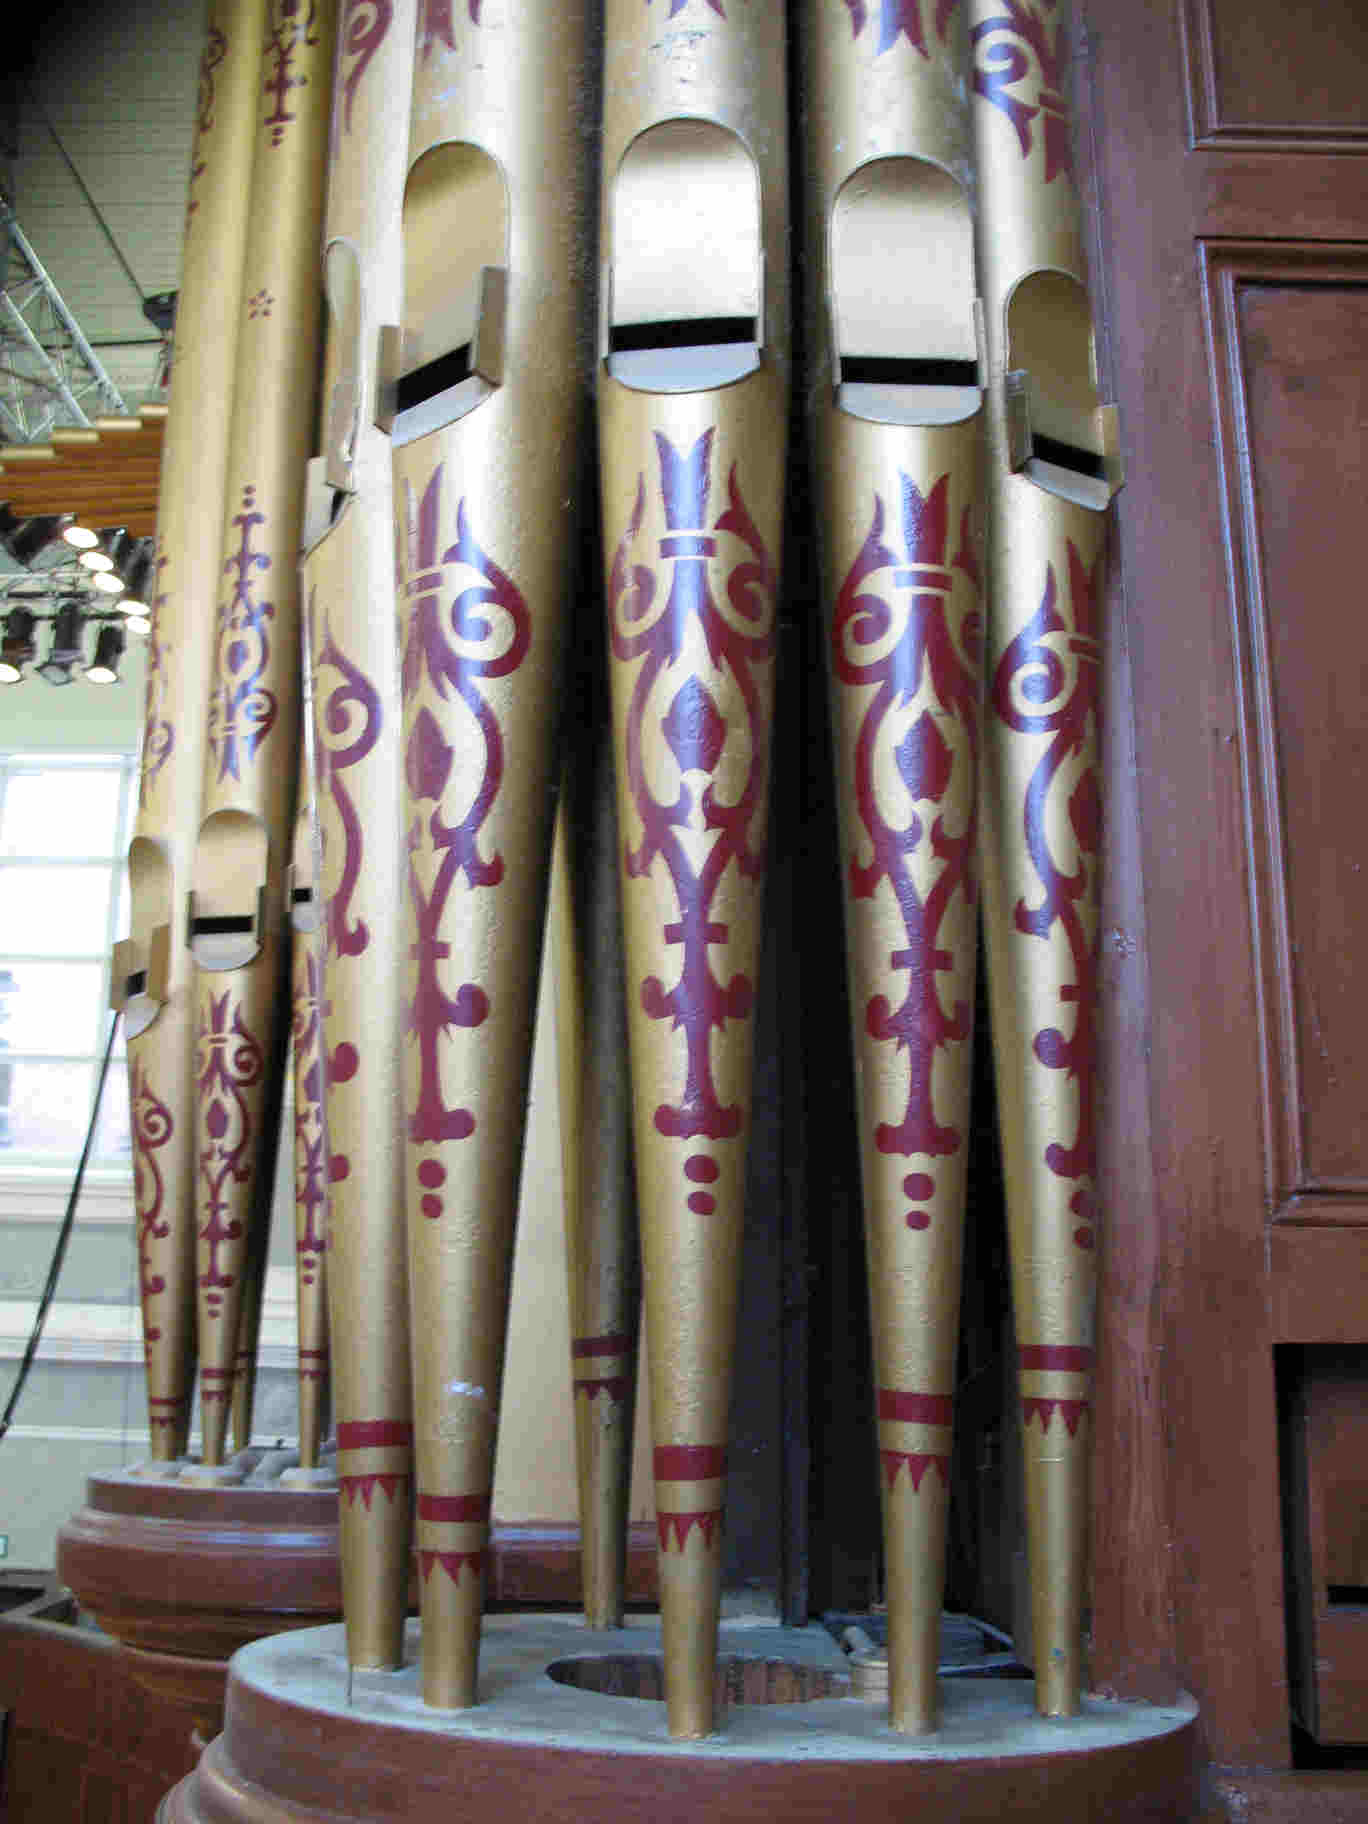 Ulster Hall organ pipes - pic by David Byers